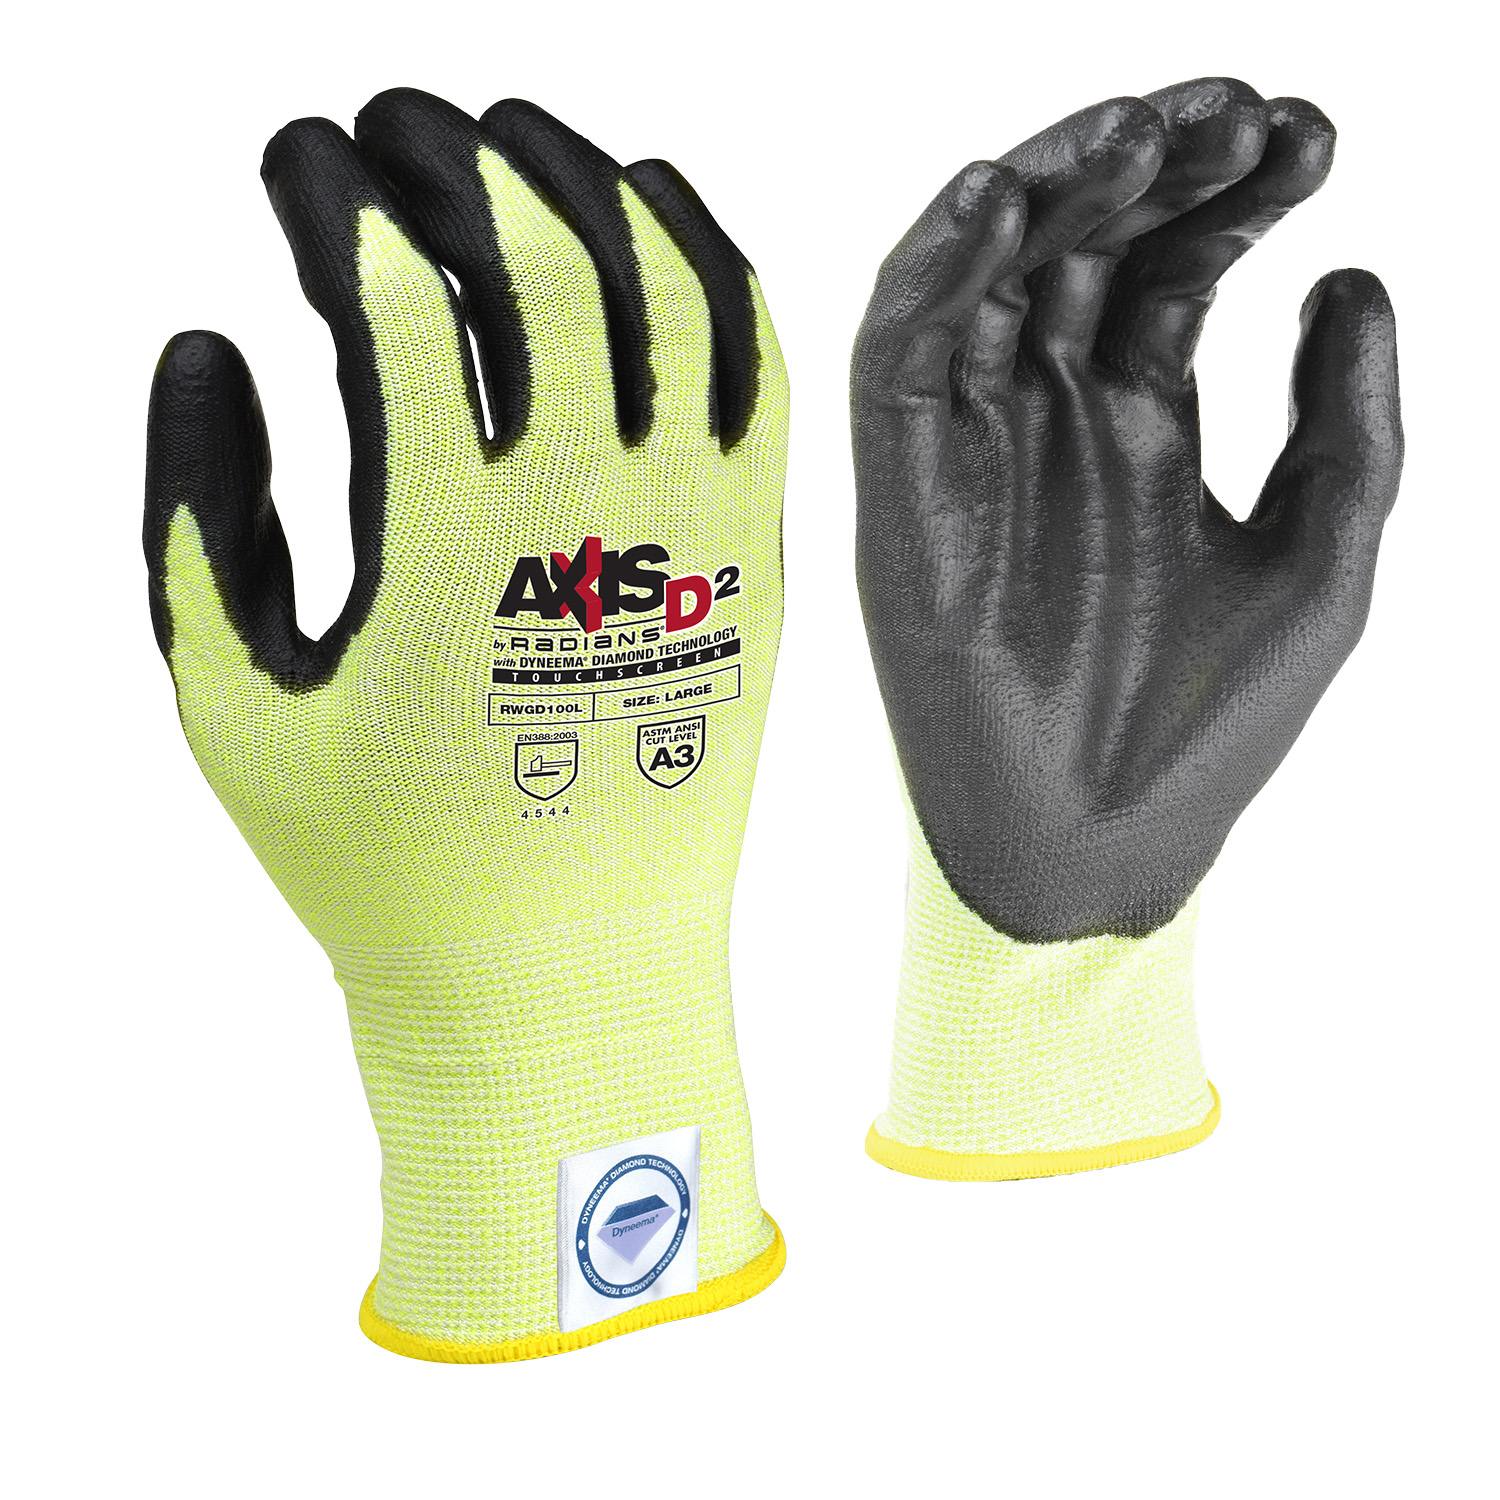 Radians RWGD100 AXIS D2™ Dyneema® Cut Protection Level A4 Touchscreen Glove